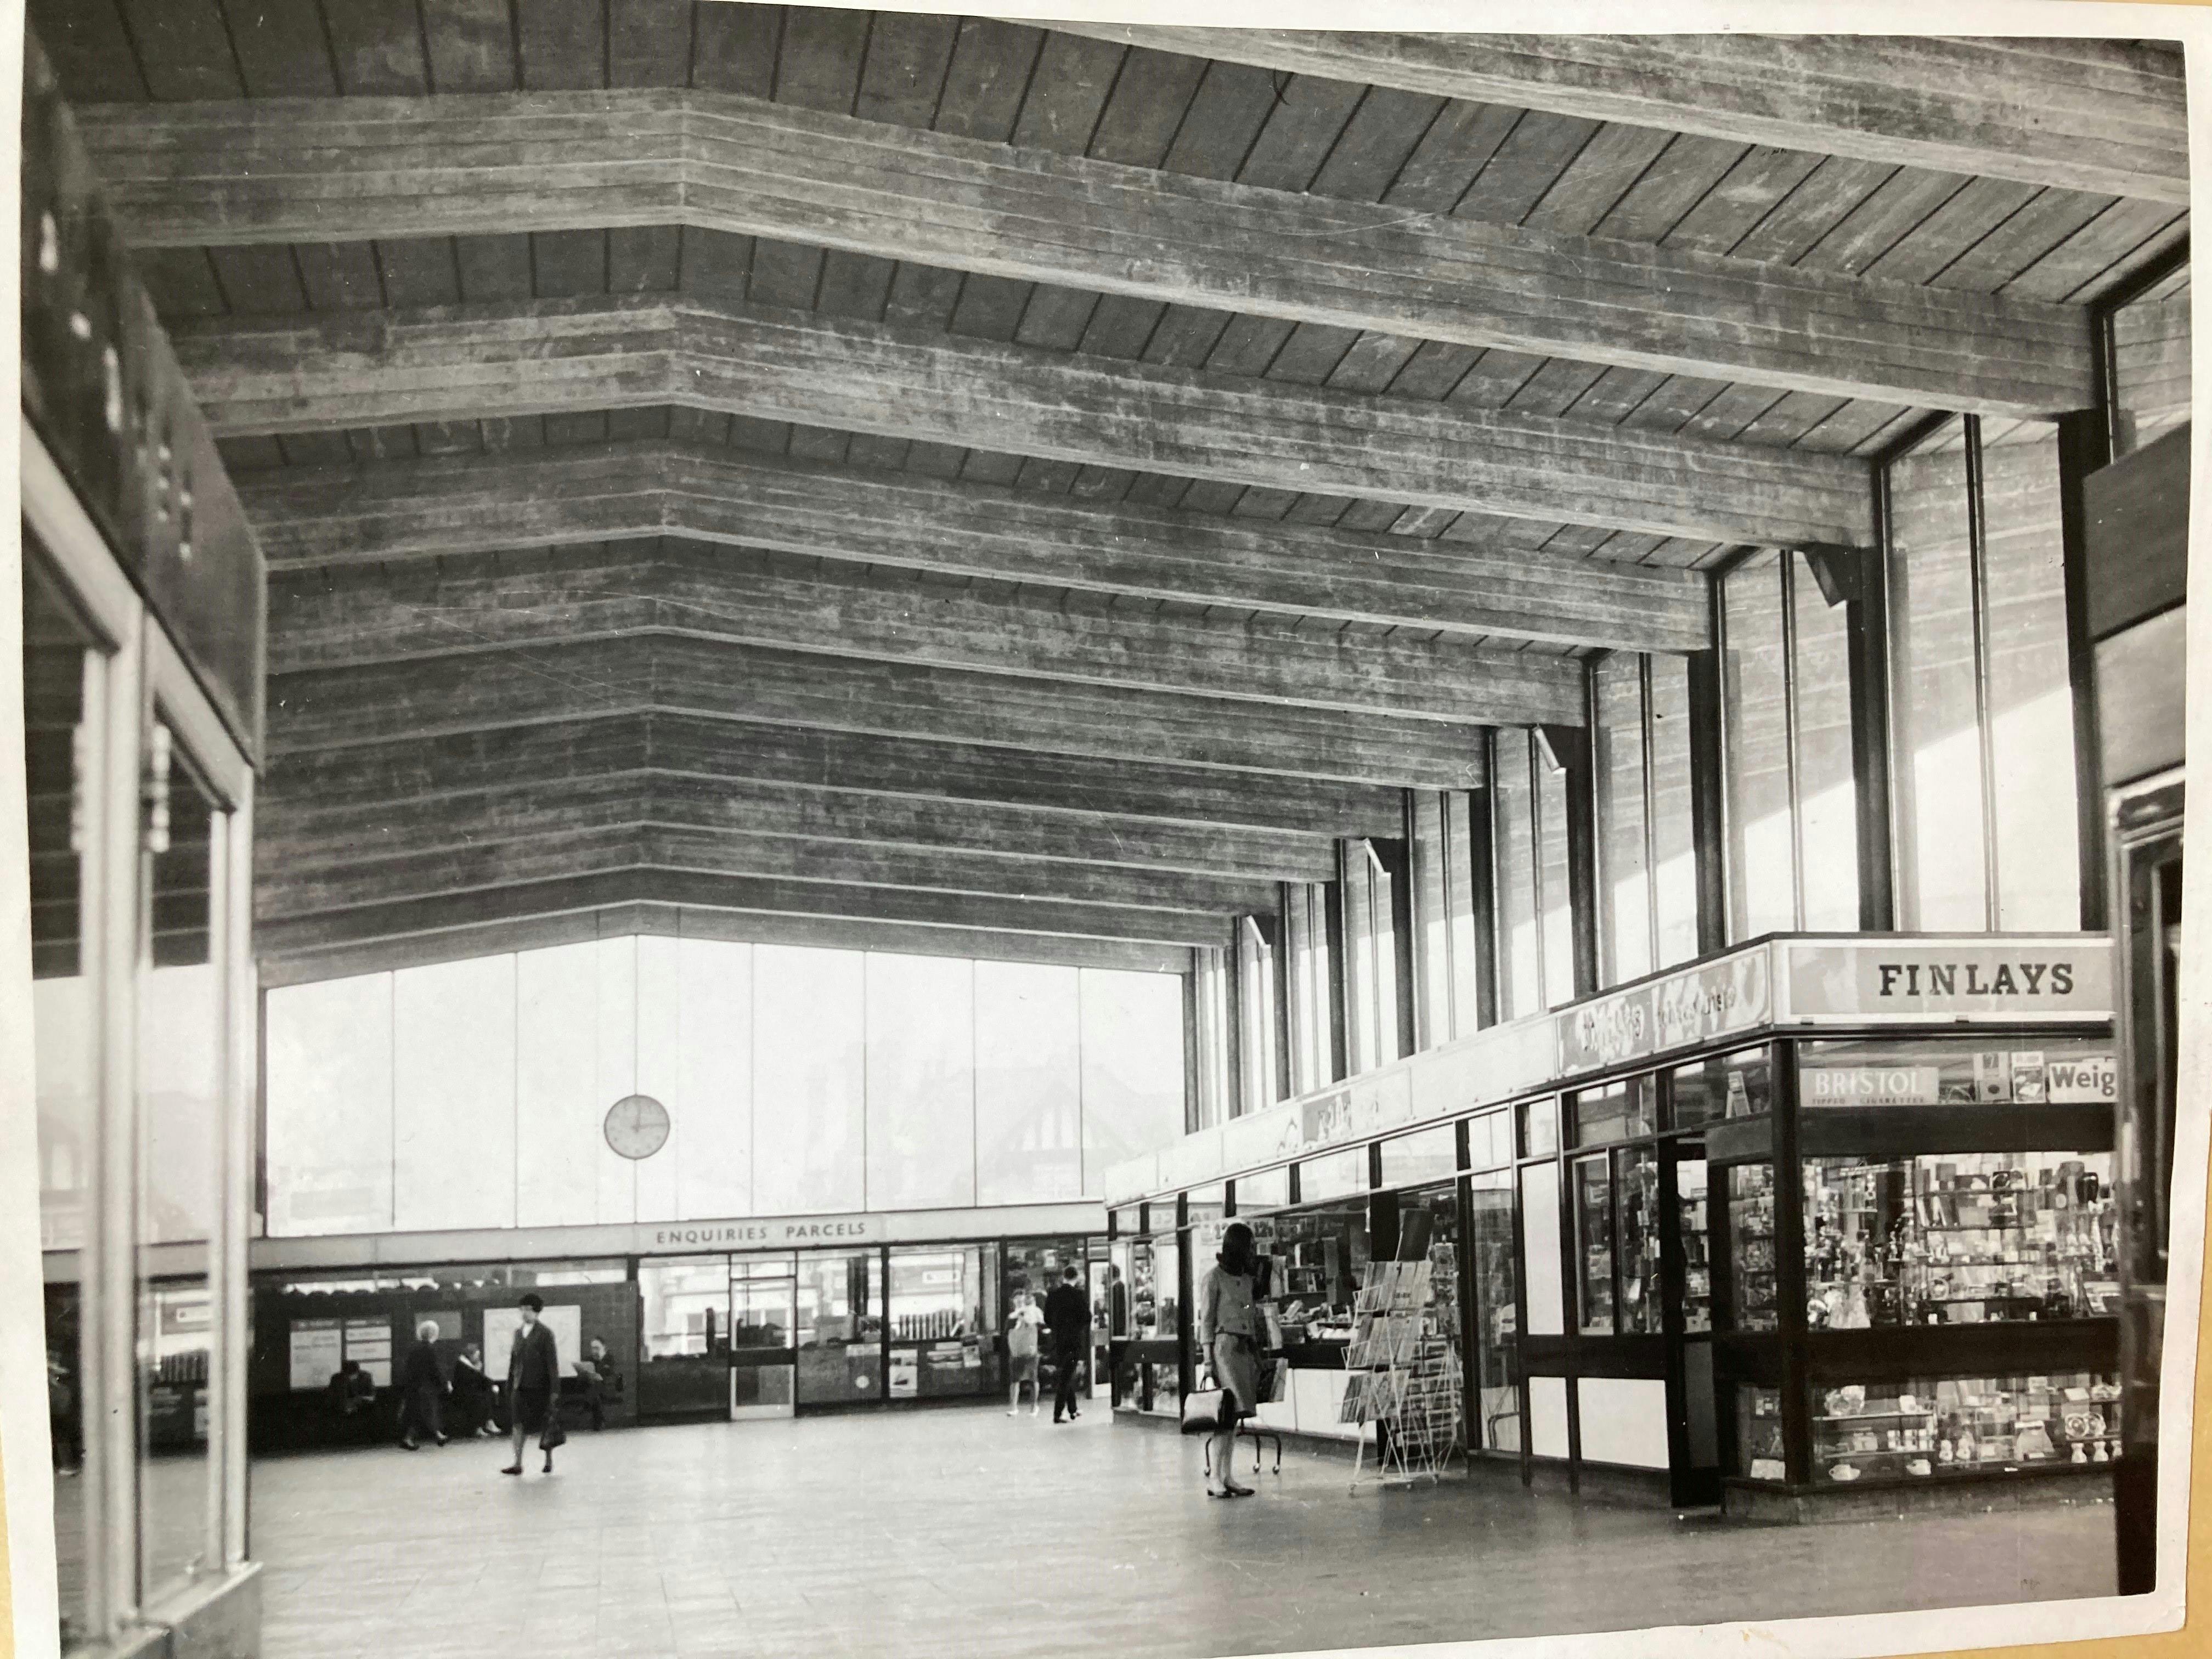 inside station booking hall, 1960s